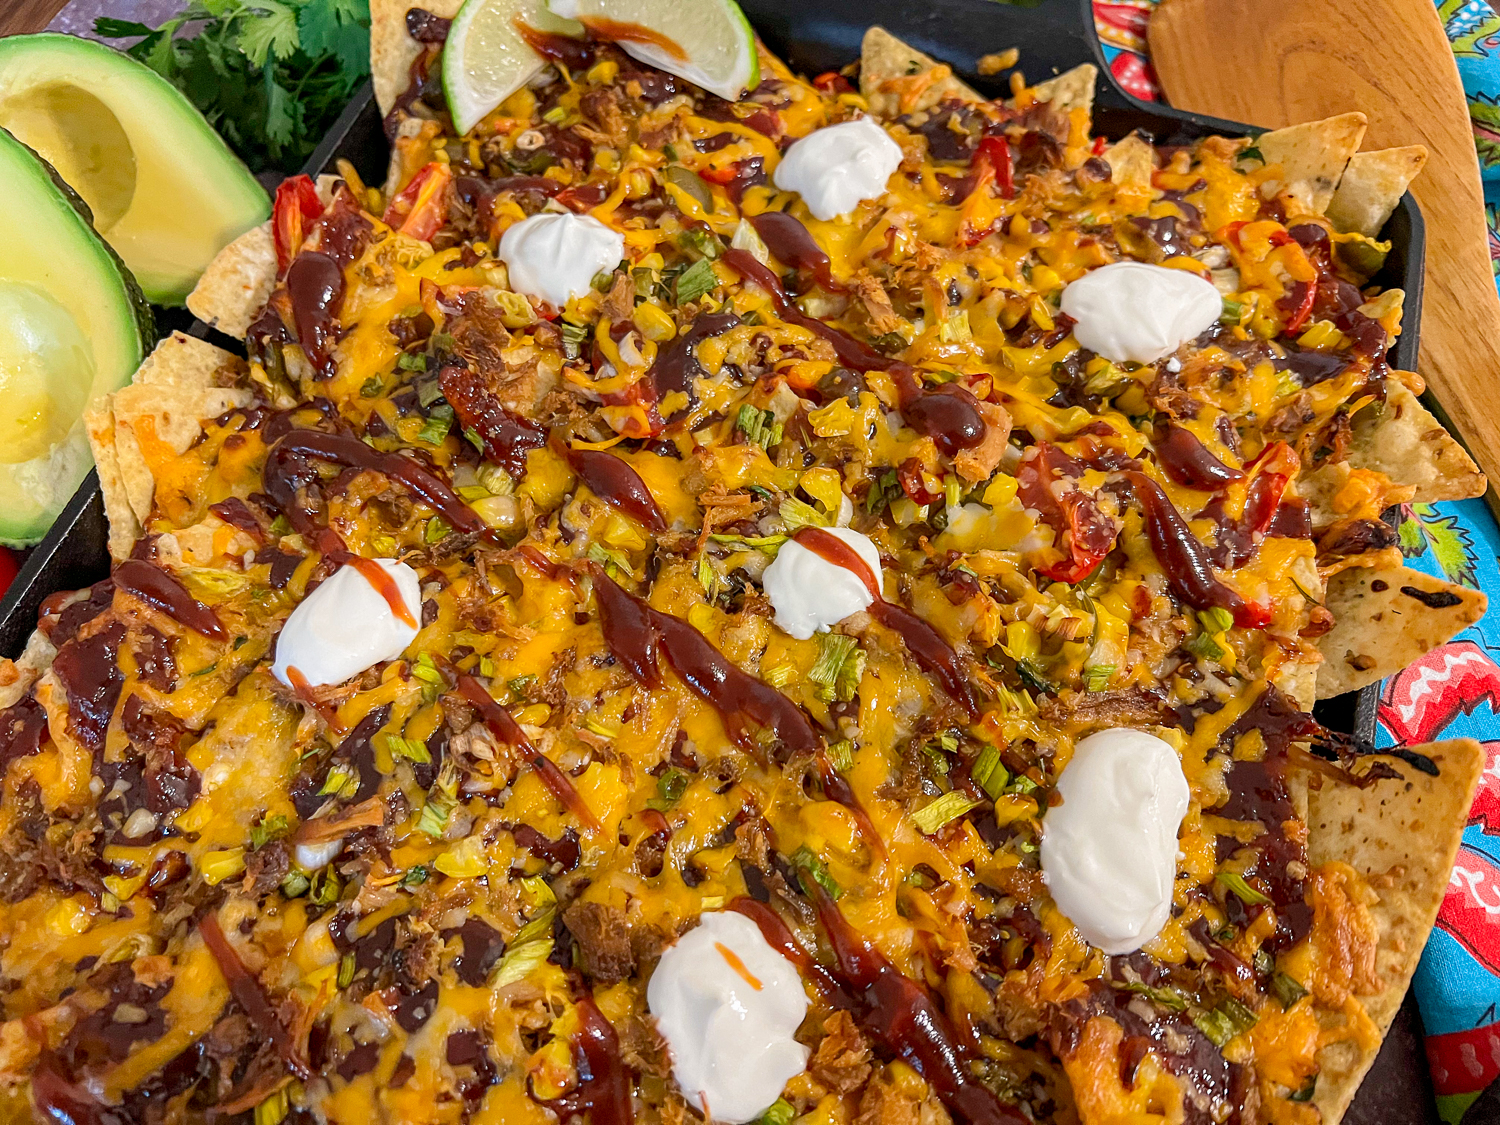 A close up view of pulled pork nachos with dollops of sour cream and drizzle of barbecue sauce.